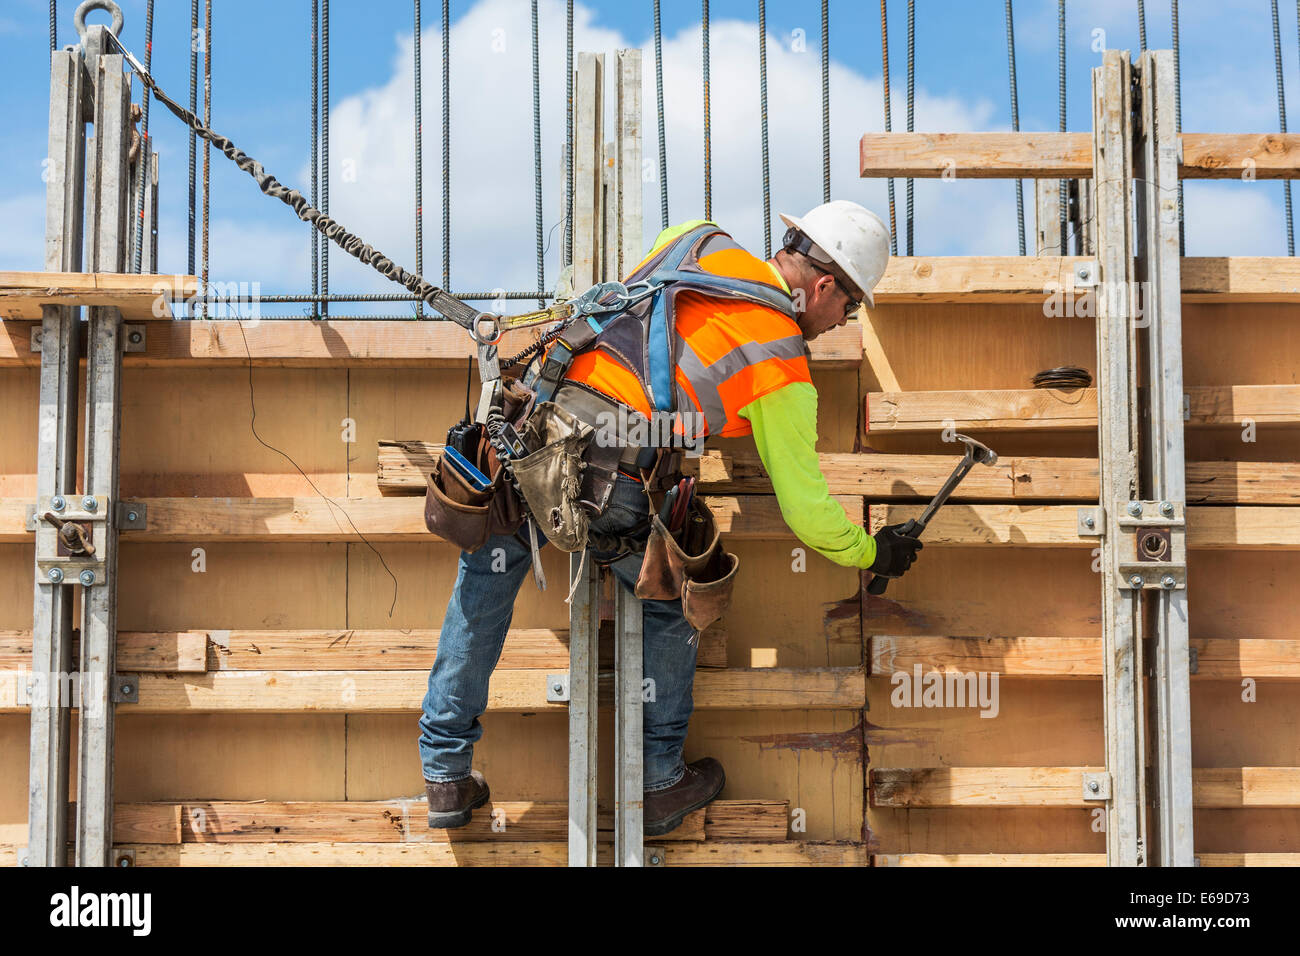 Caucasian worker hammering wood at construction site Stock Photo